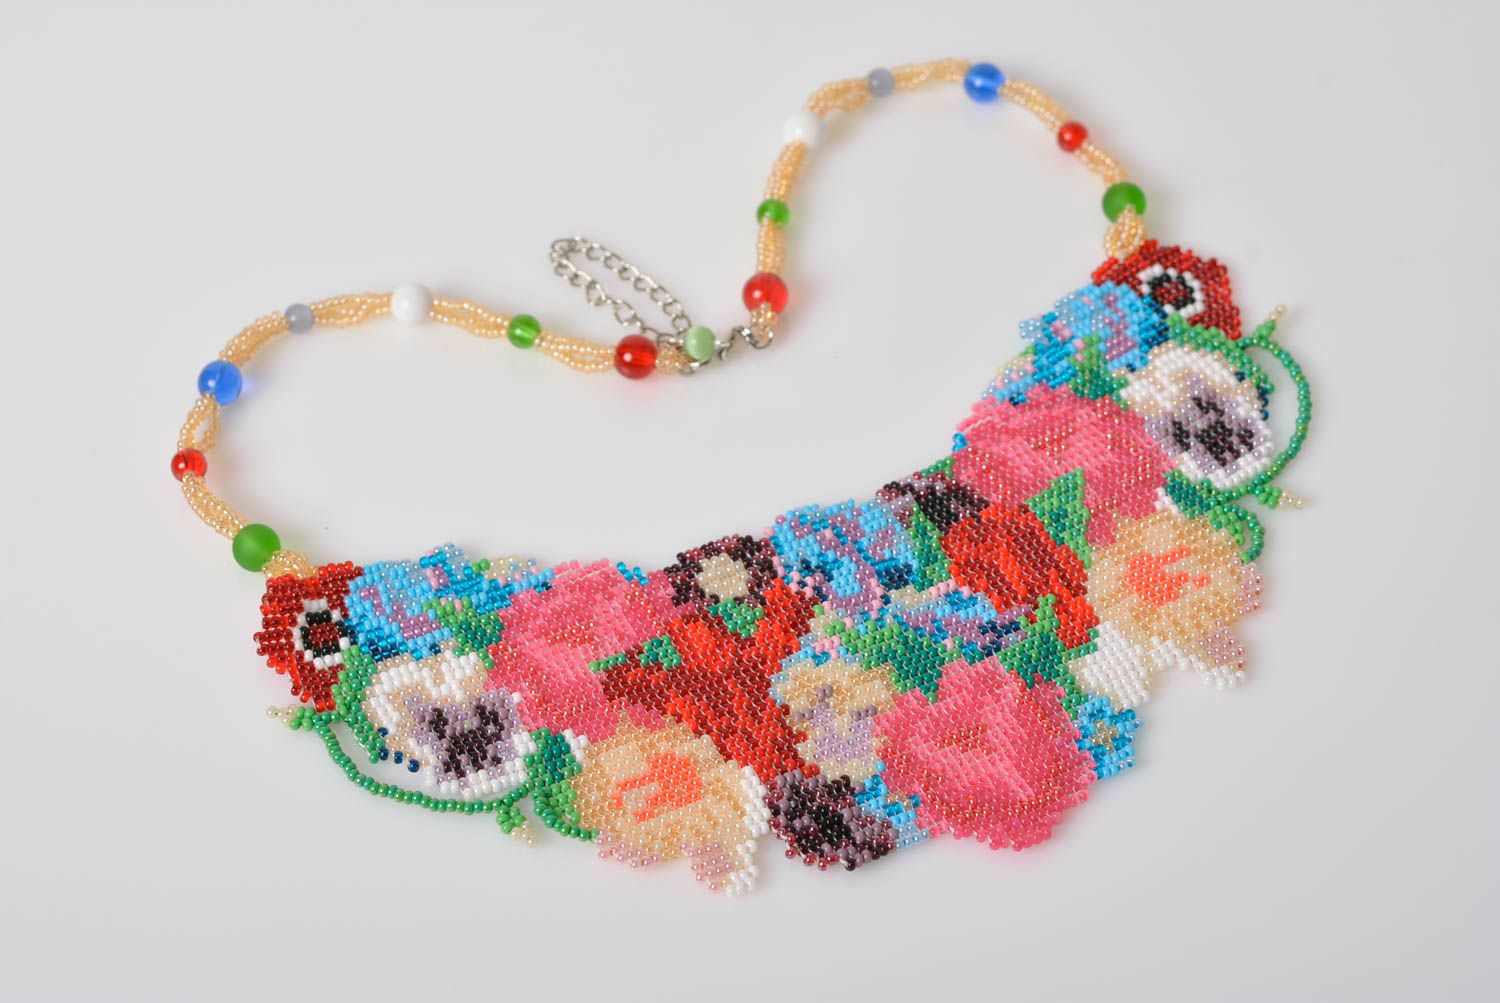 Handmade designer colorful tender bead woven necklace with floral pattern photo 1